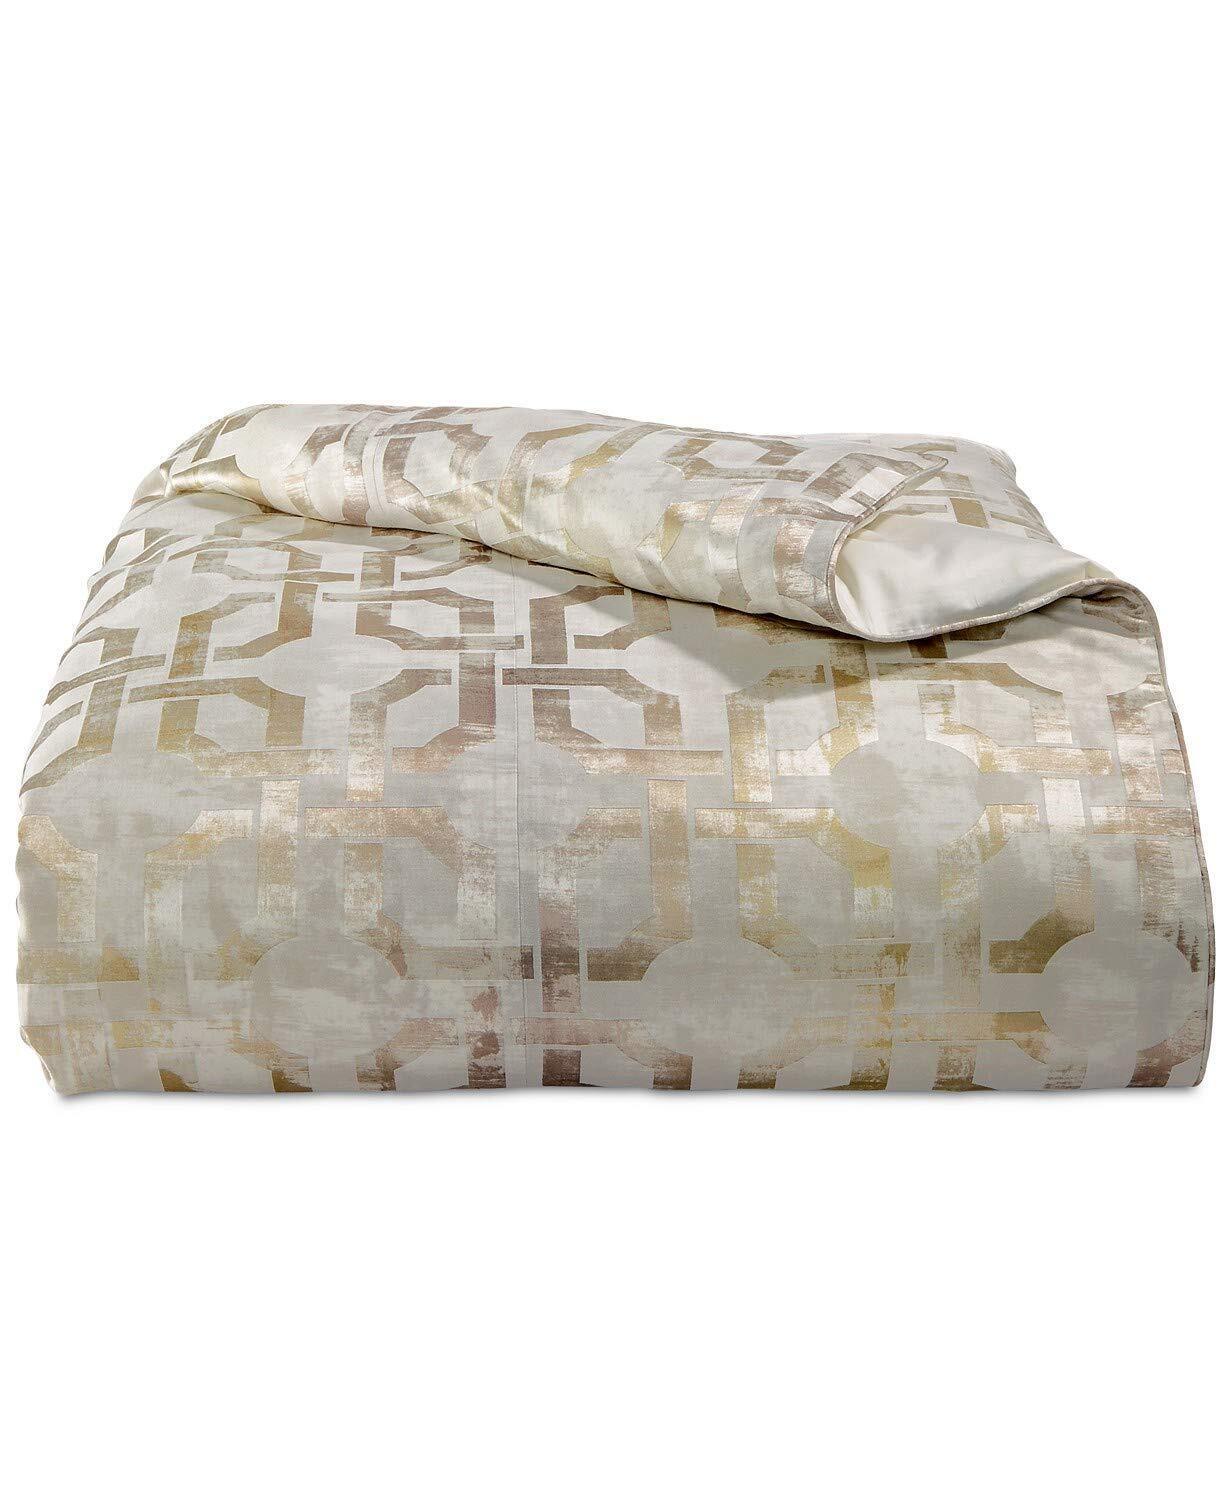 HOTEL COLLECTION Comforter King / Gold HOTEL COLLECTION - Gold Woven Jacquard Geometric